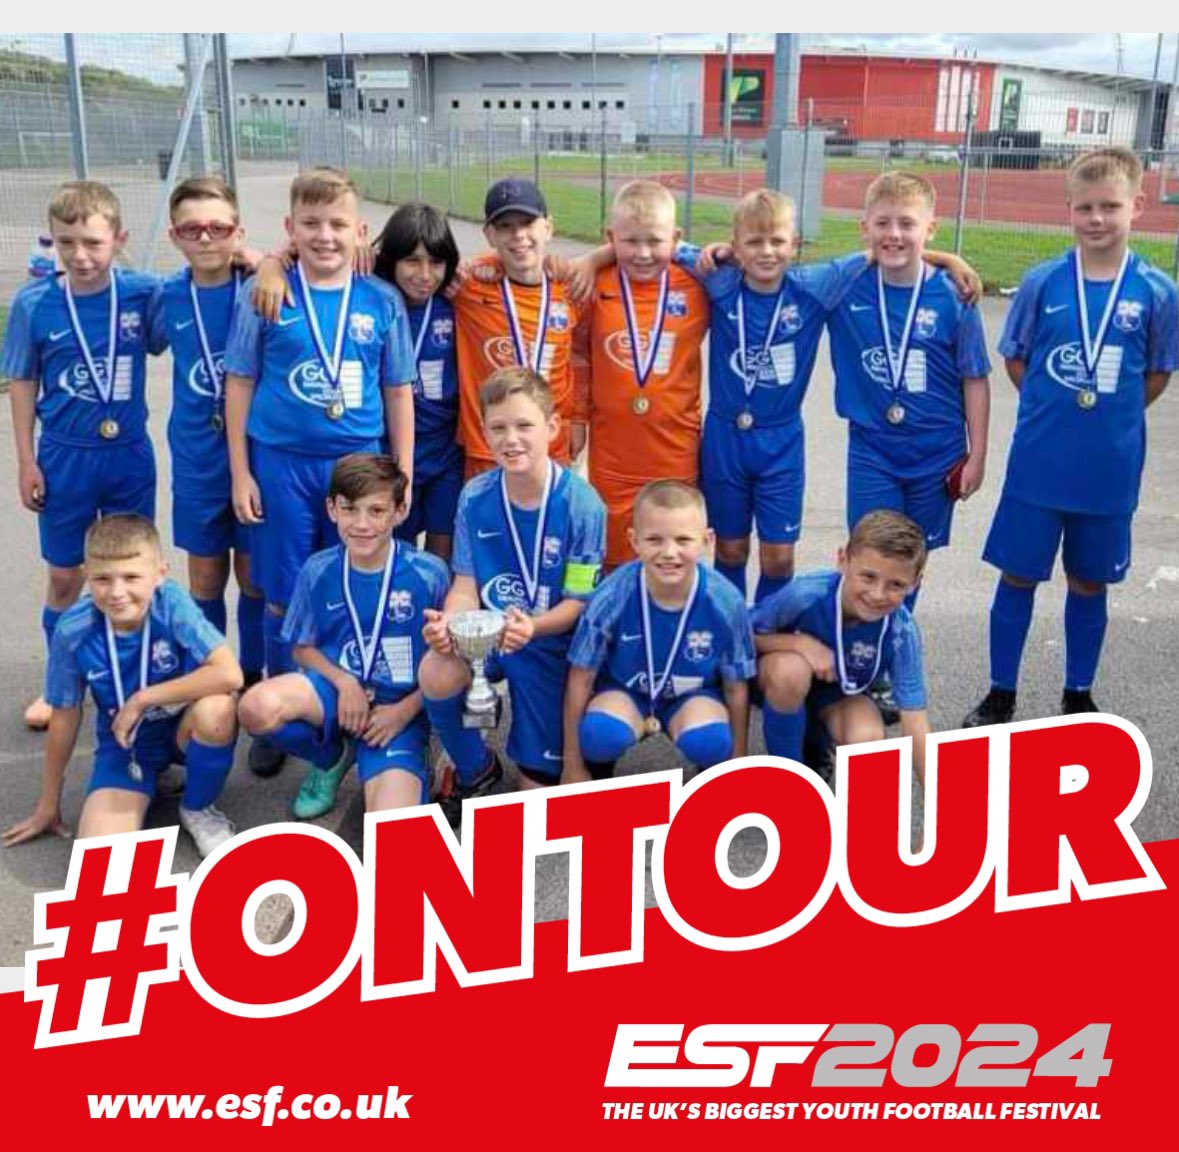 Rossington U11's are very excited to go #OnTour to ESF 2024 at Butlins Skegness!

#ESF2024 #TheUltimateTour